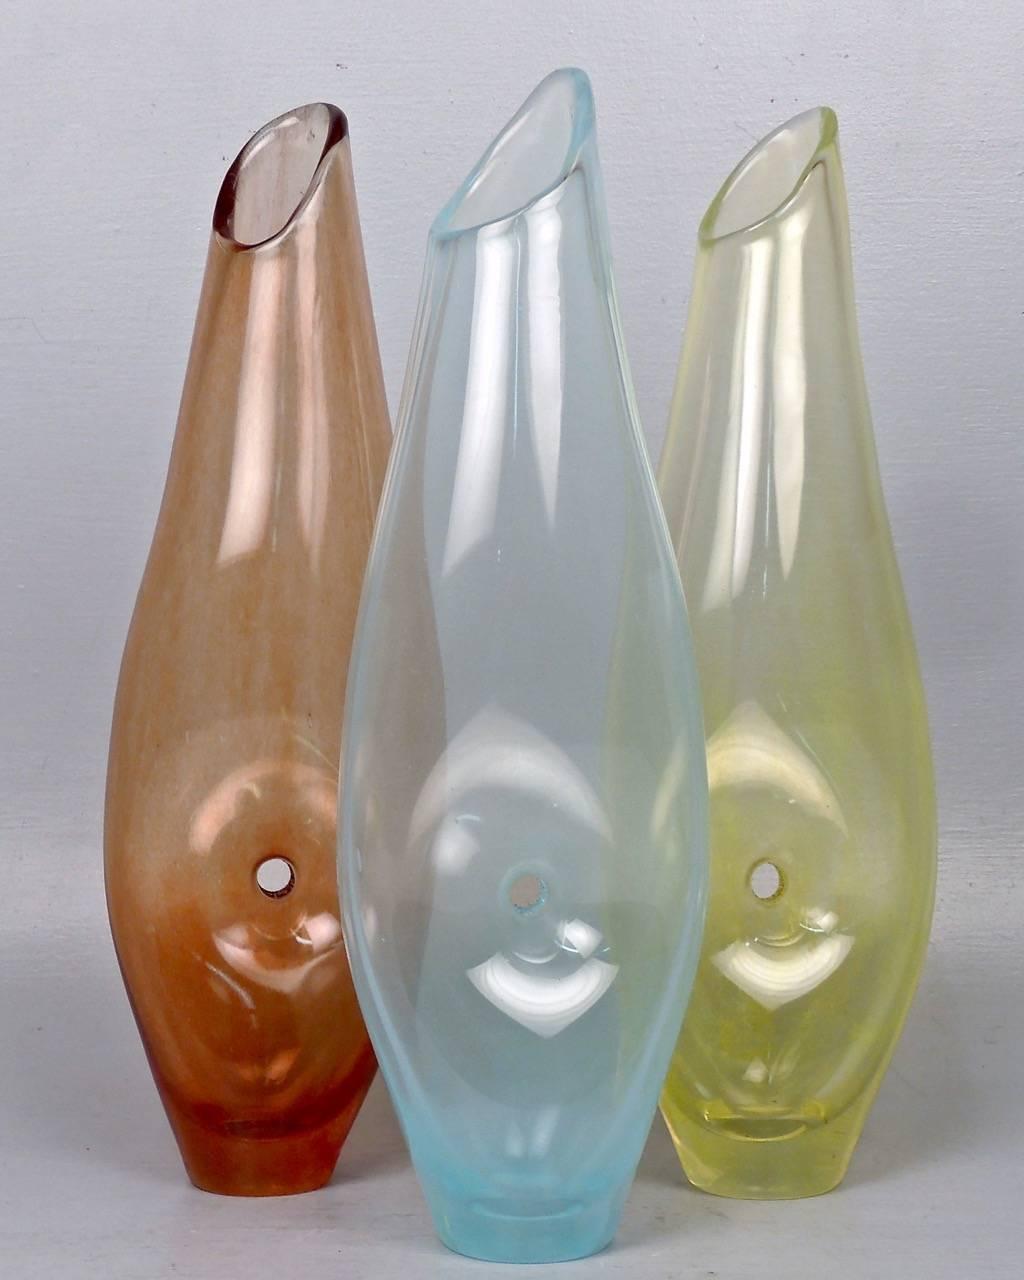 These vases comprise a set of three complimentary, organic, modernist vases by the noted Brazilian artist and designer Jacqueline Terpins. 

Each vase has a pierced center and an light, almost striated color distribution. The pierced center design